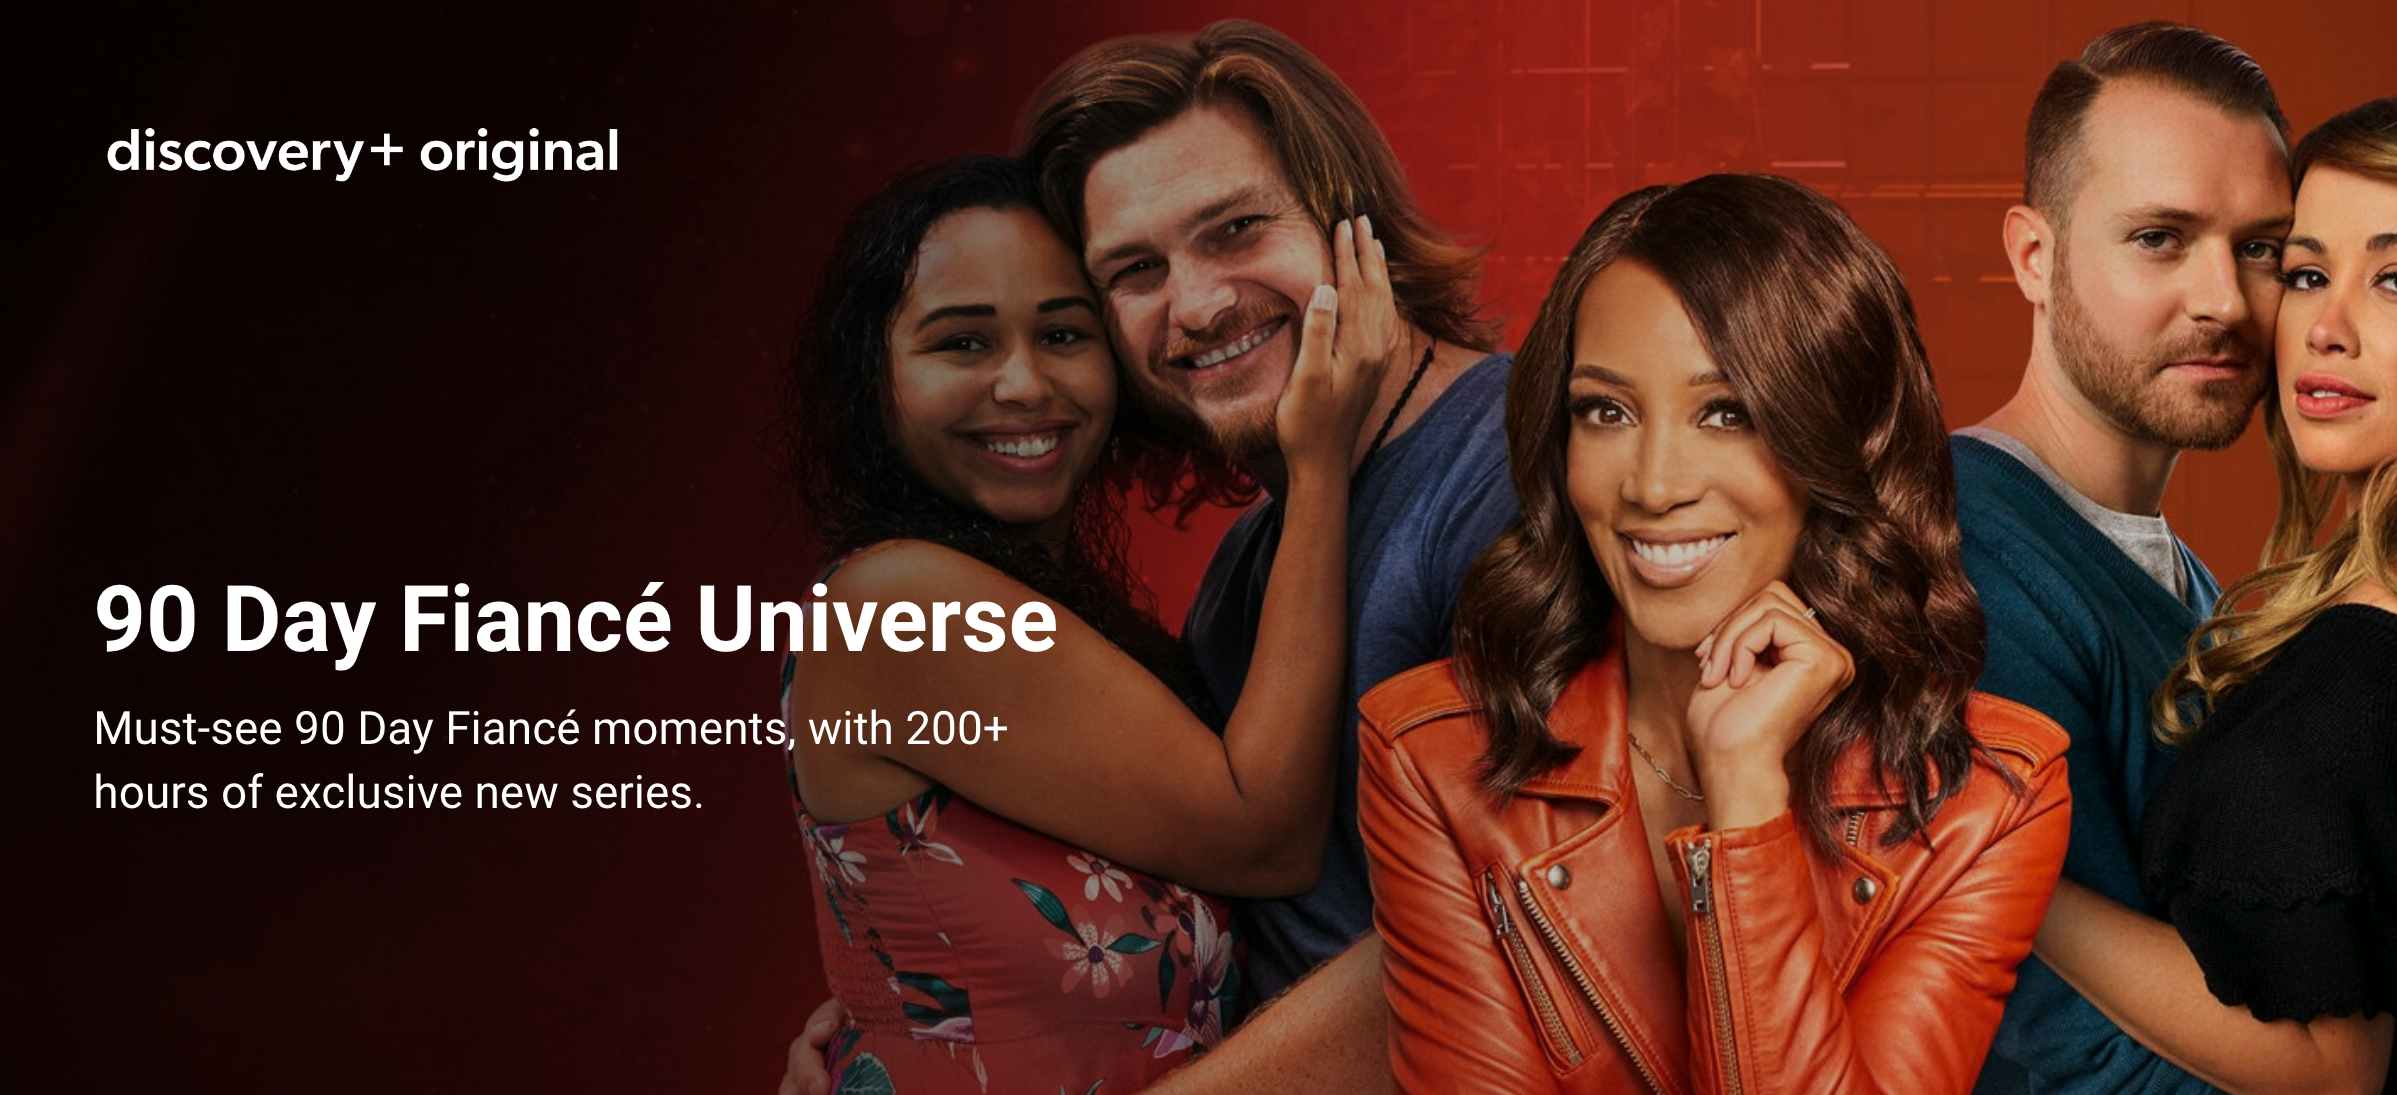 A screenshot of the Discovery Plus original 90 Day Fiance Universe banner.